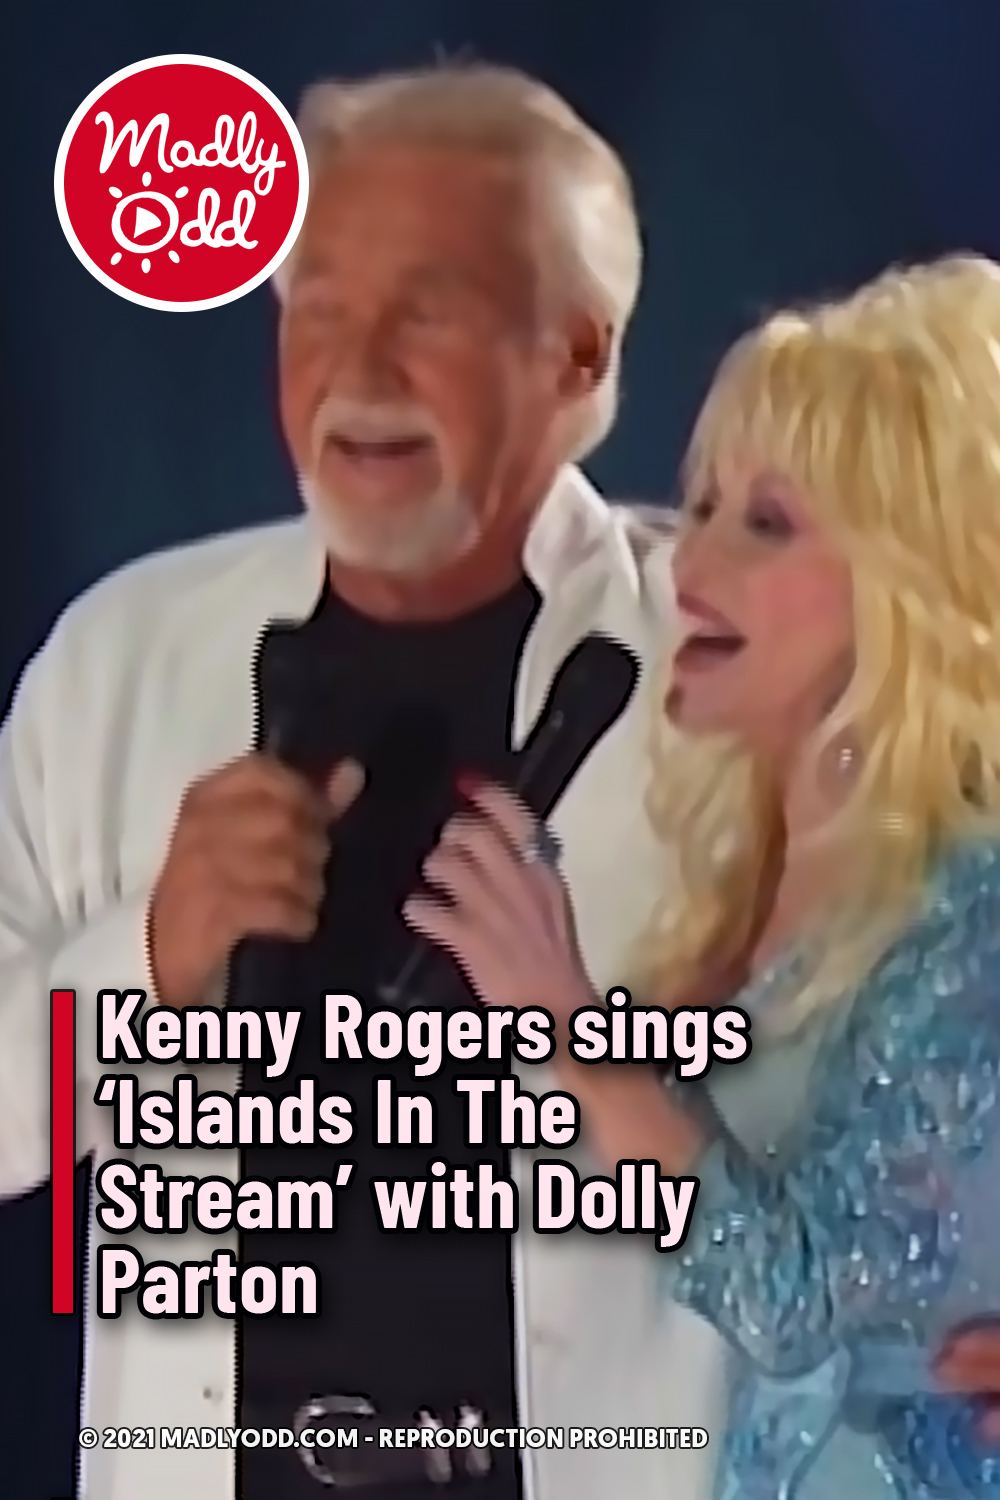 Kenny Rogers sings ‘Islands In The Stream’ with Dolly Parton